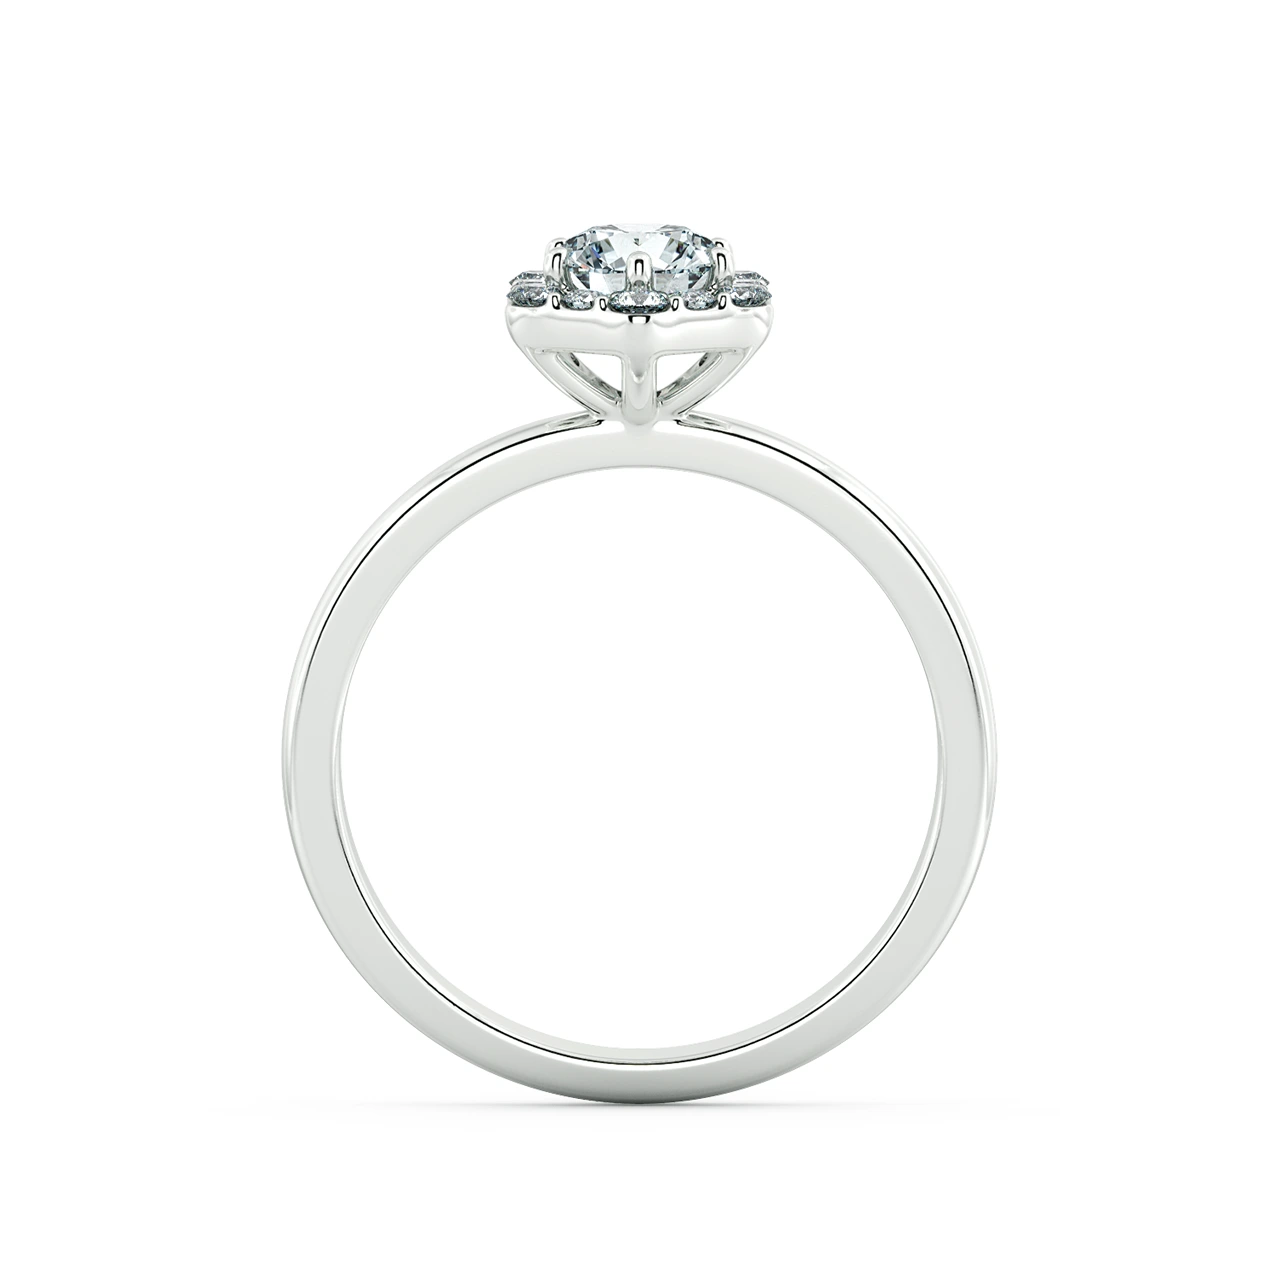 Single Classic Octagonal Halo Engagement Ring NCH2104 5